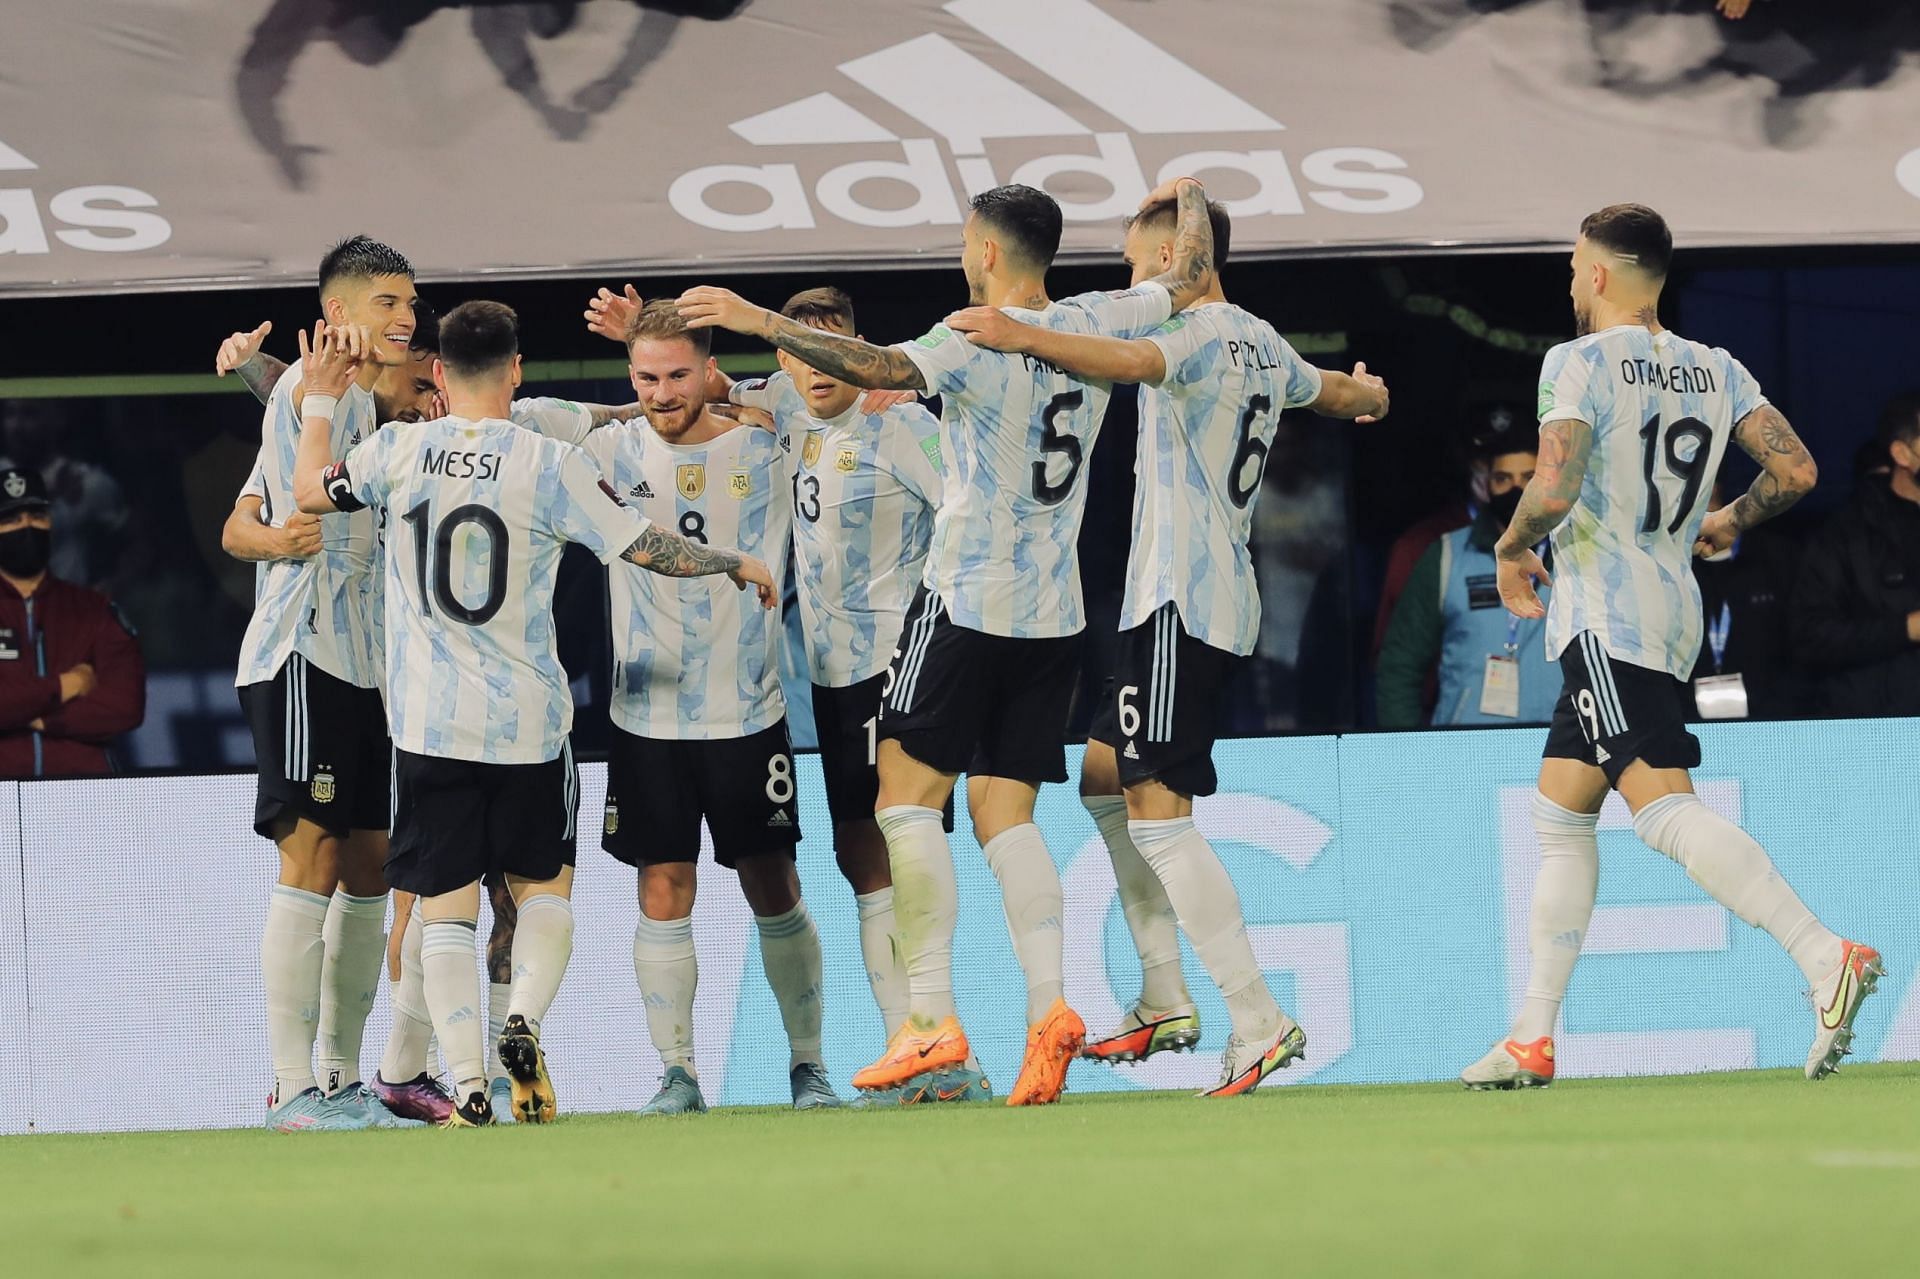 Argentina secured a win in the last home game of the World Cup qualifiers